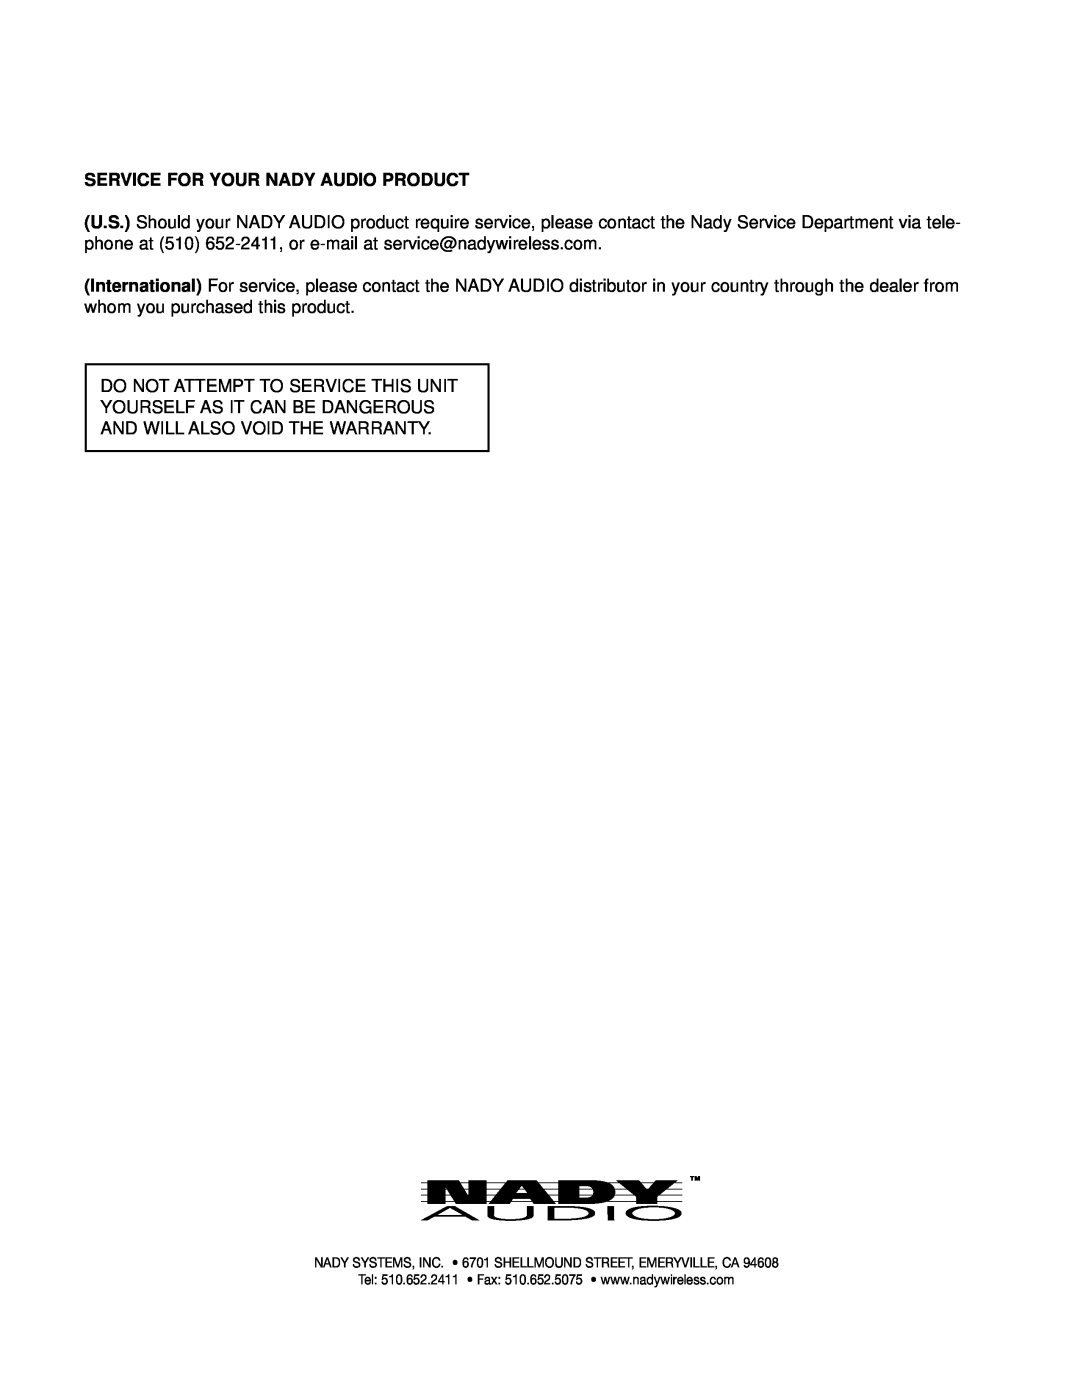 Nady Systems CMX-16A owner manual Service For Your Nady Audio Product 